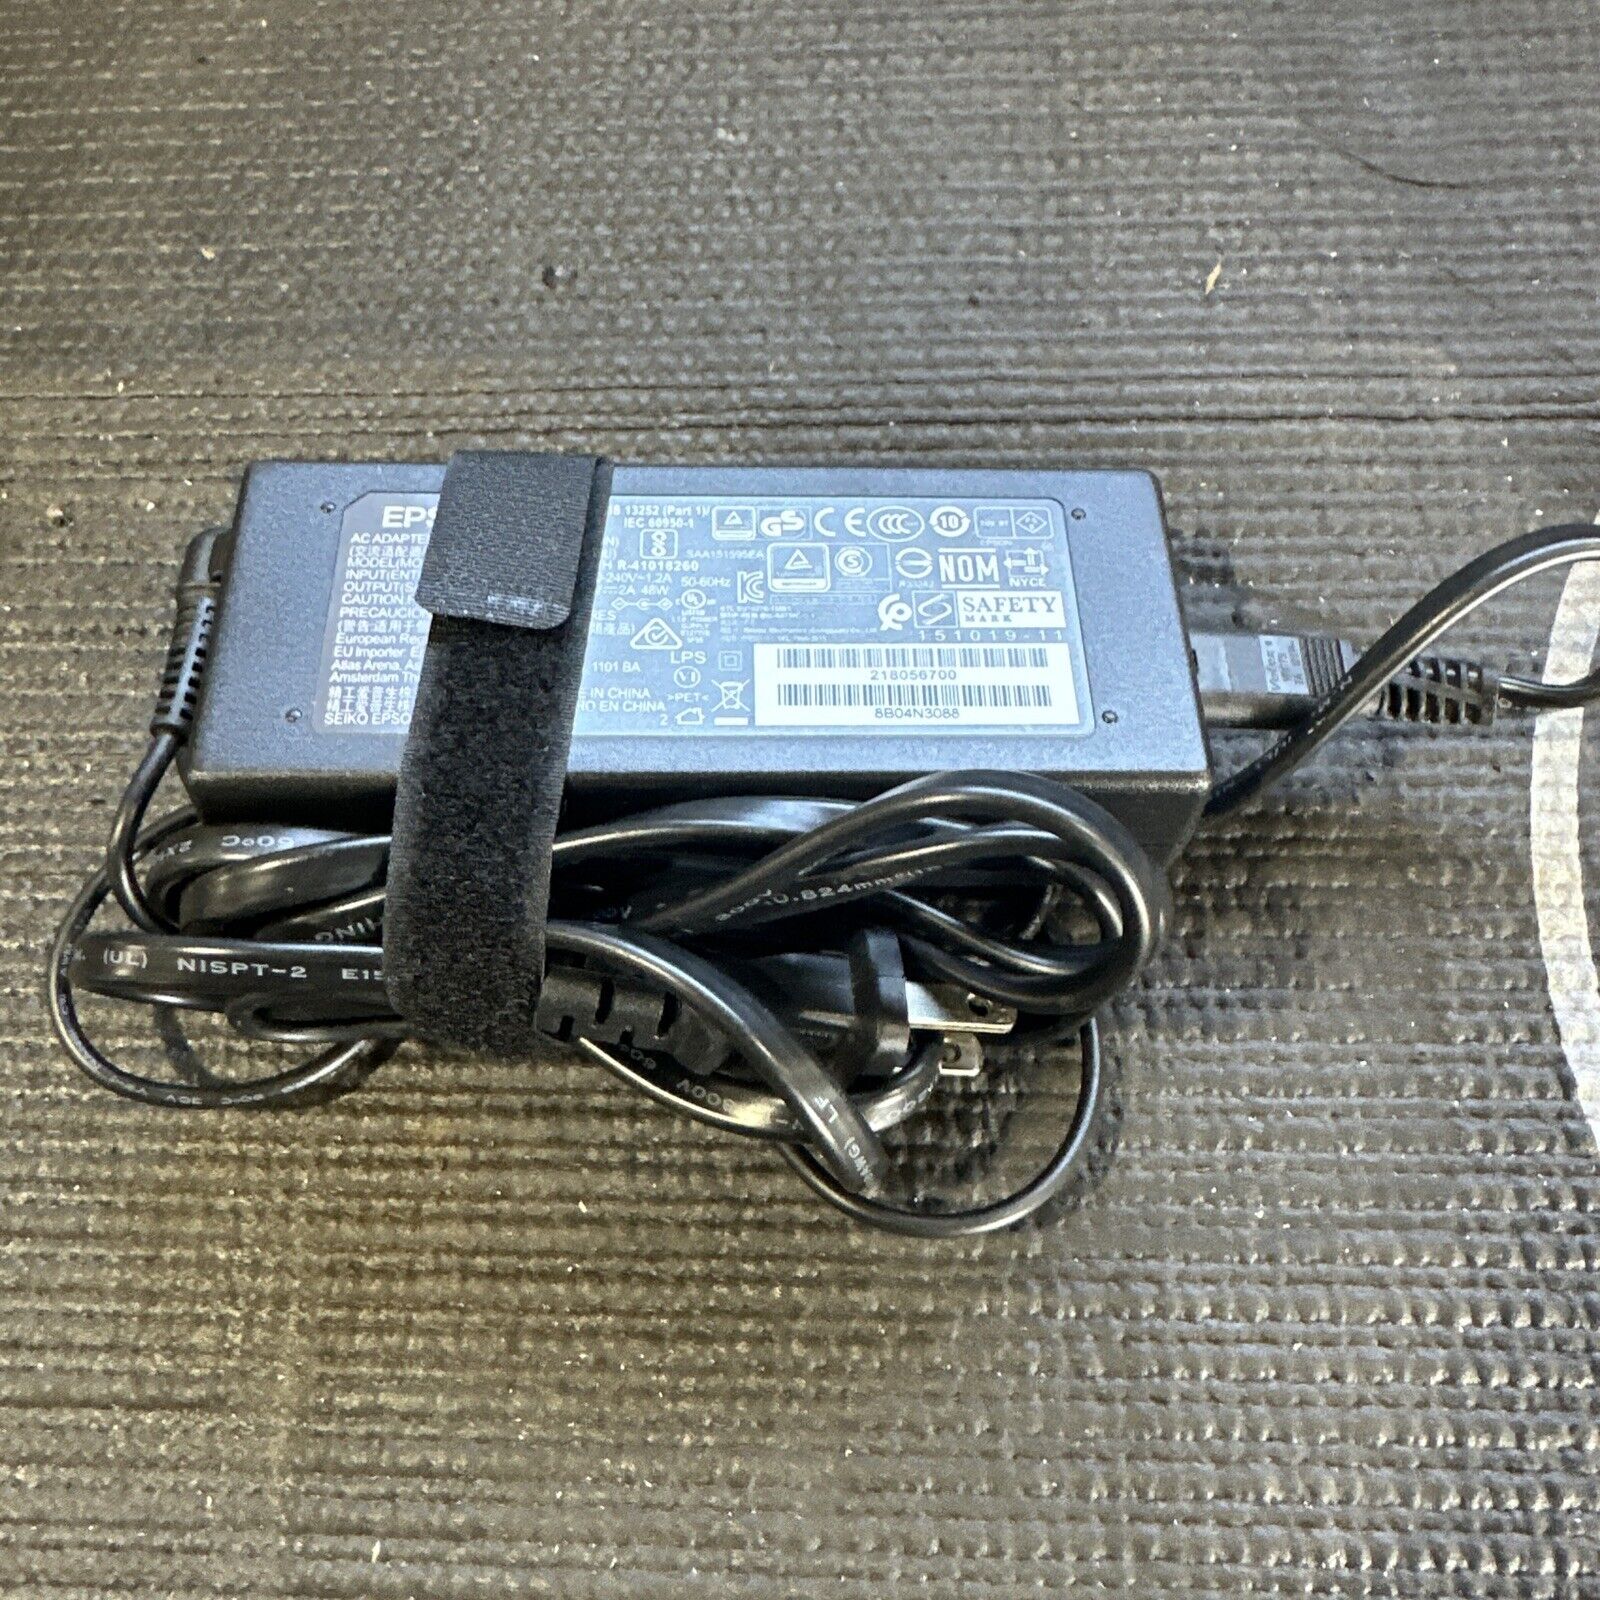 Epson A471H 24V 2A 48W Power Supply Adapter for Document Scanner & Printer